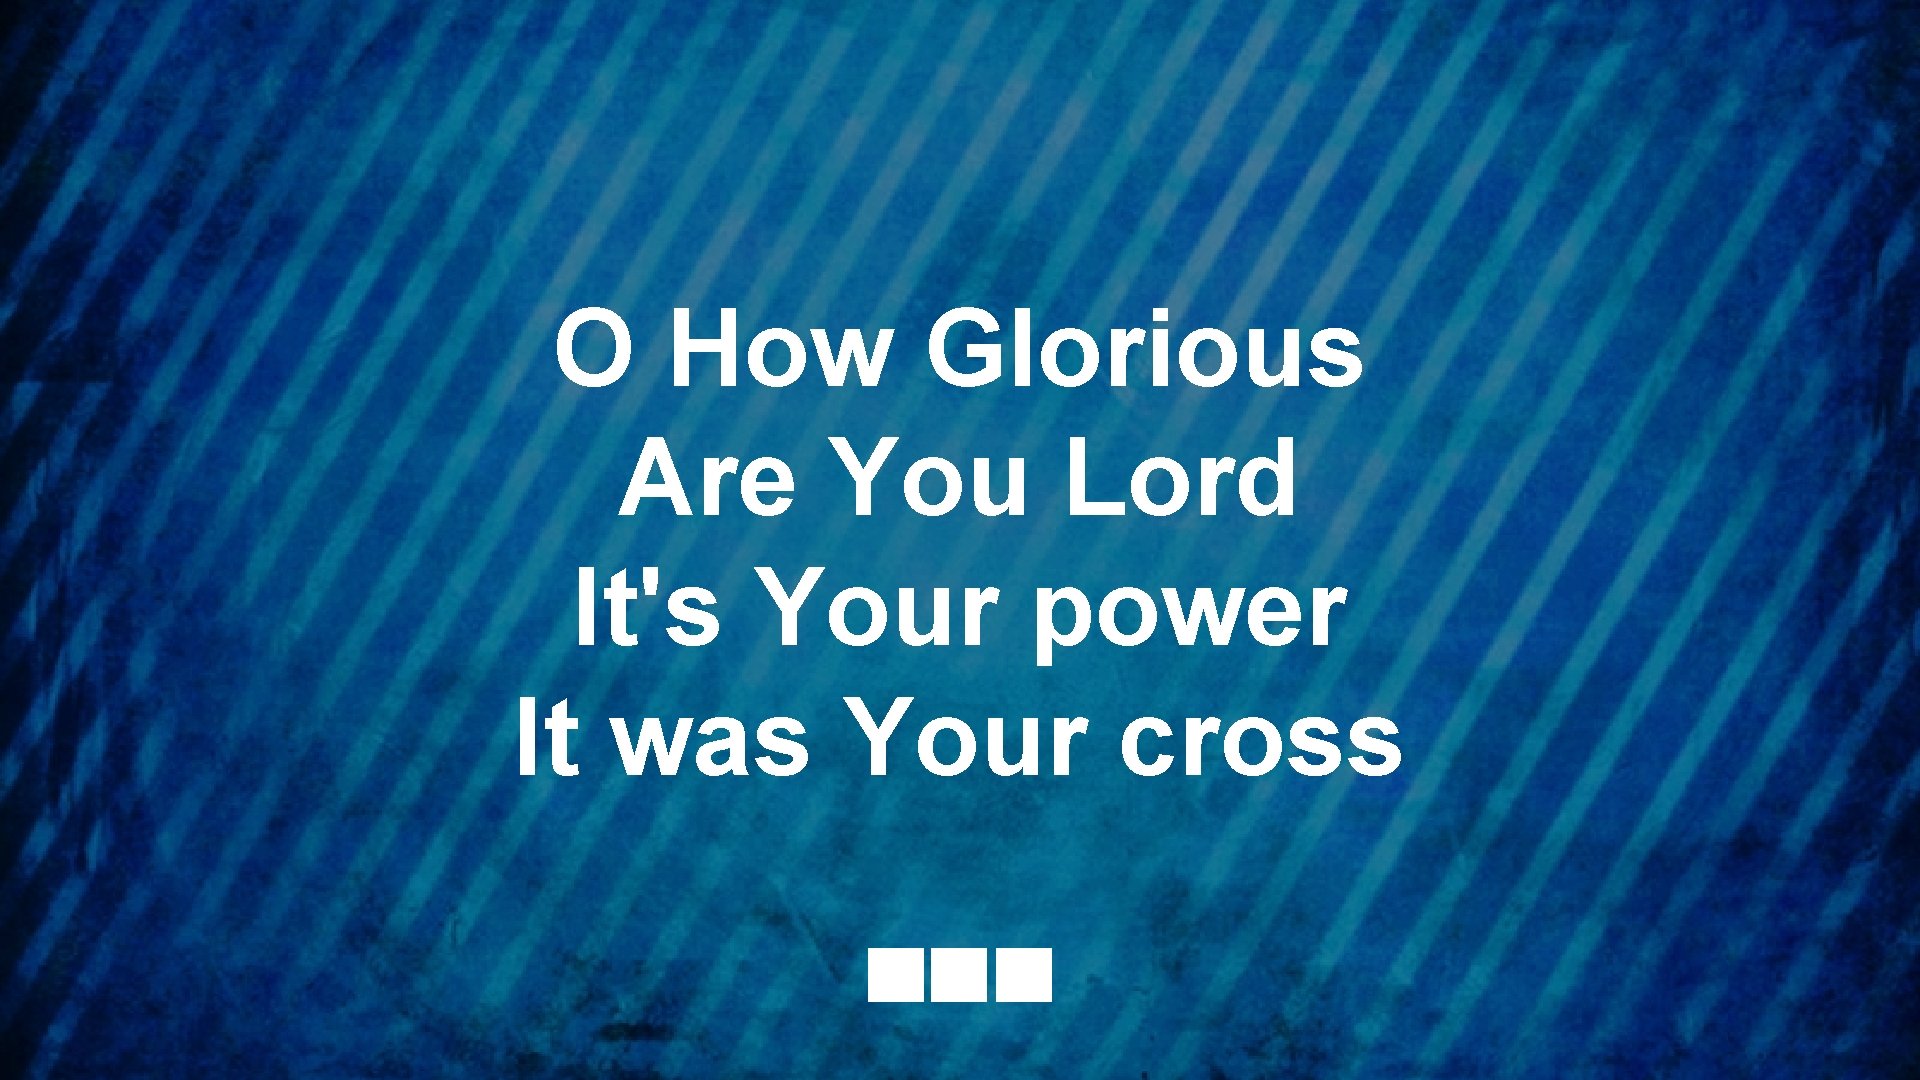 O How Glorious Are You Lord It's Your power It was Your cross 